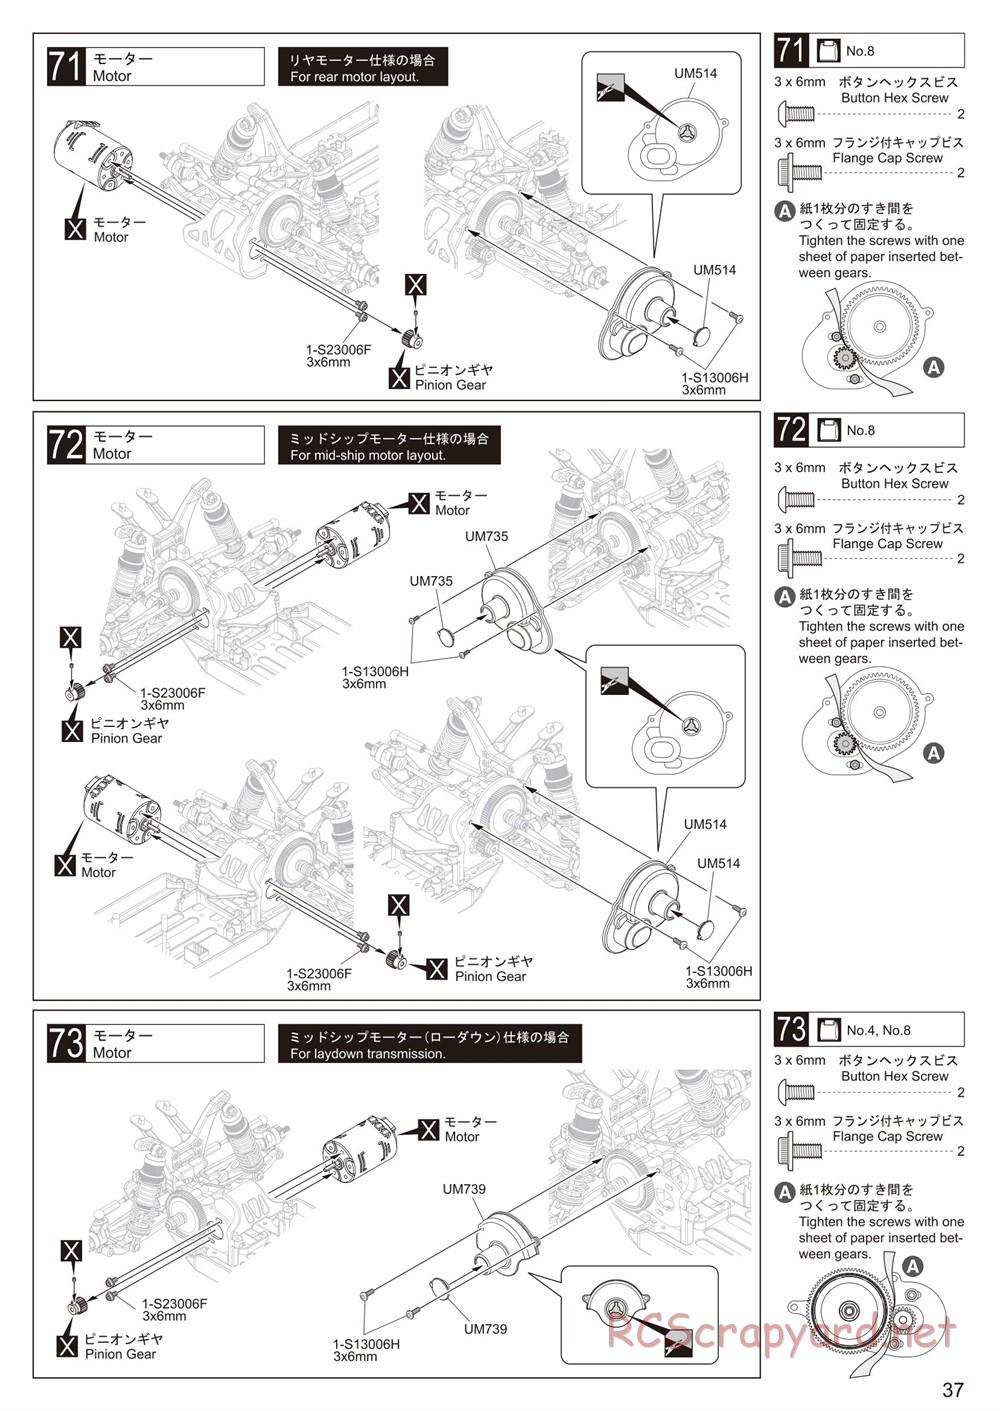 Kyosho - Ultima RB6.6 - Manual - Page 37